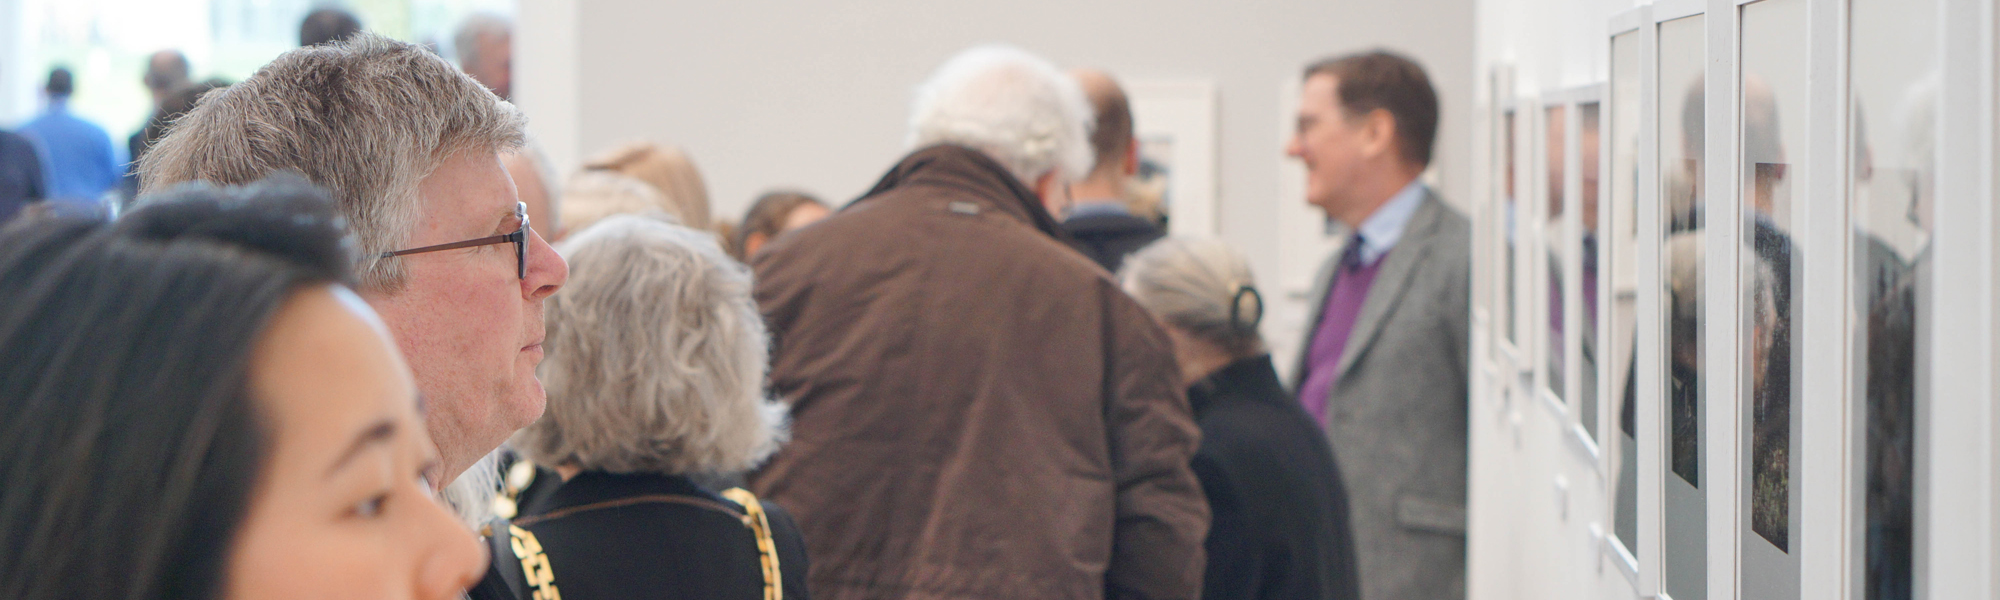 Visitors looking at art in an exhibition